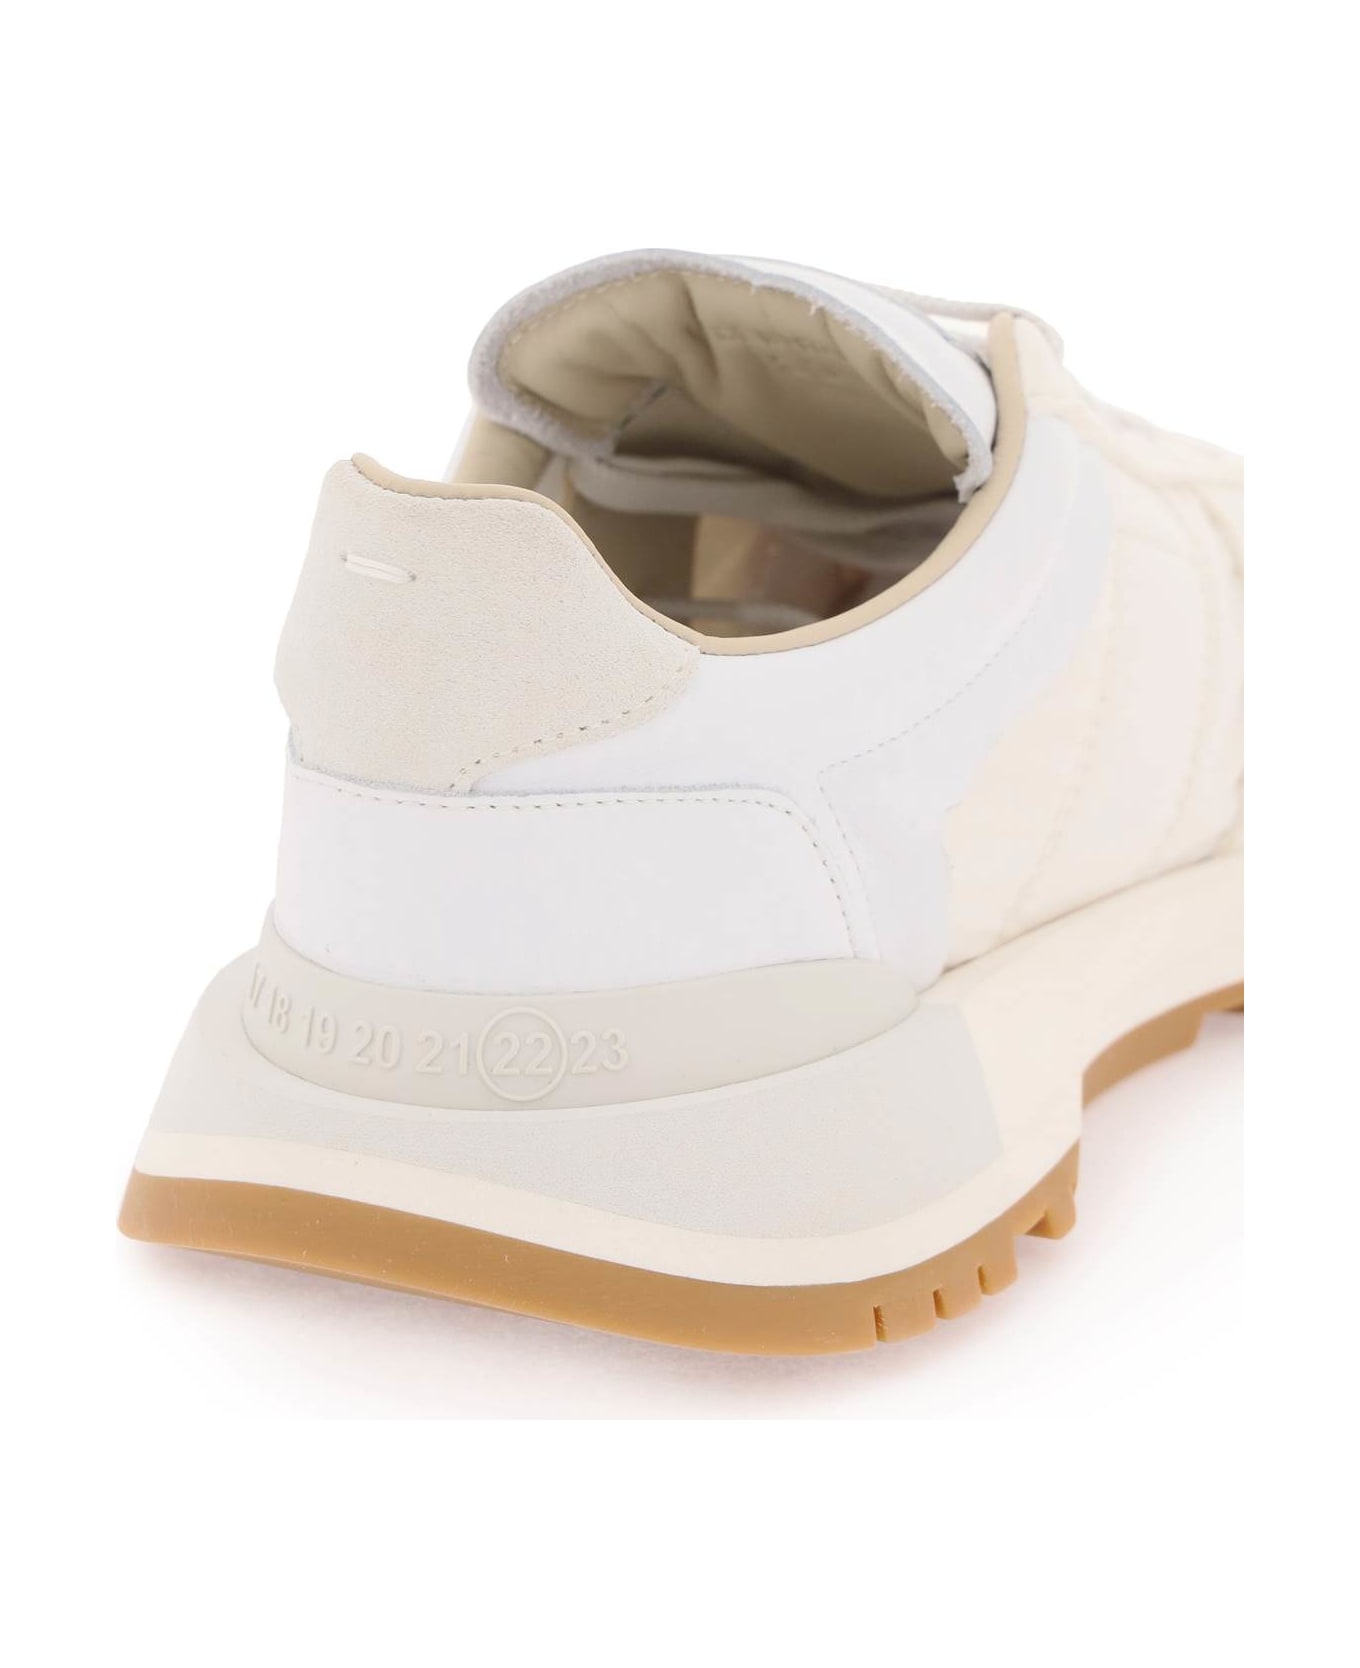 Maison Margiela Laced Low Sneakers - White